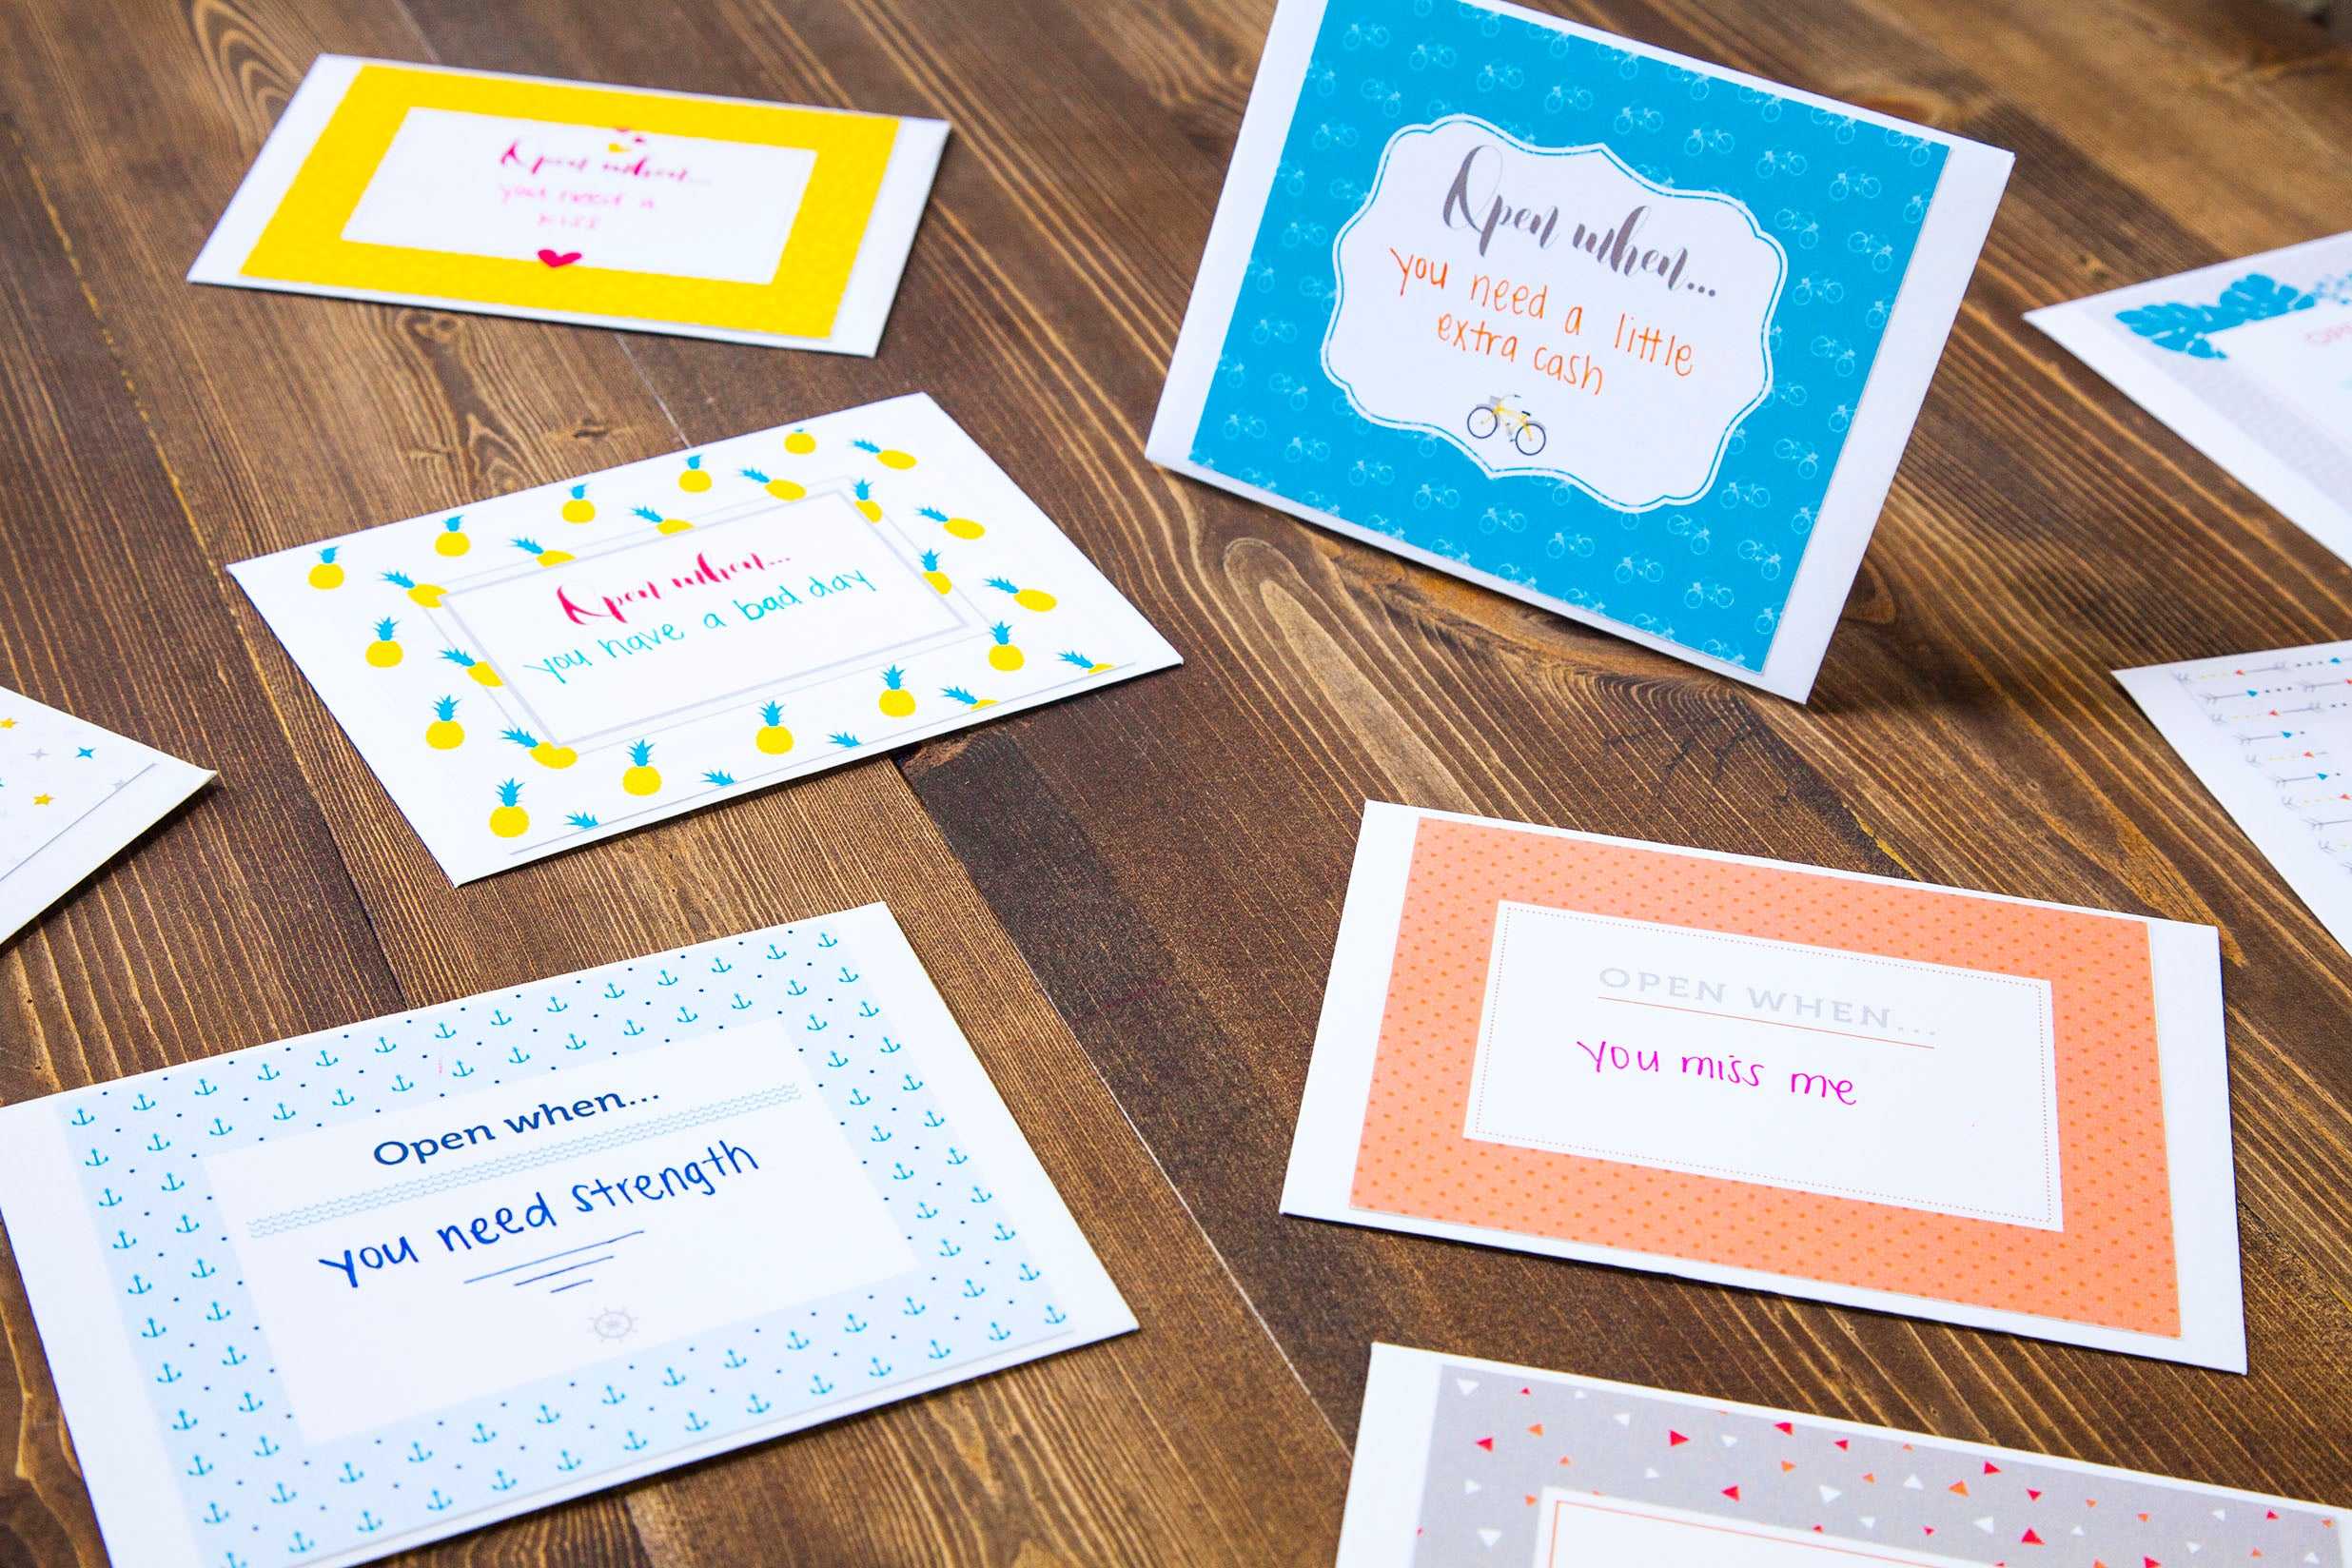 Open When Letters: 280 Ideas + Printables – Shari's Berries Blog Inside 52 Reasons Why I Love You Cards Templates Free